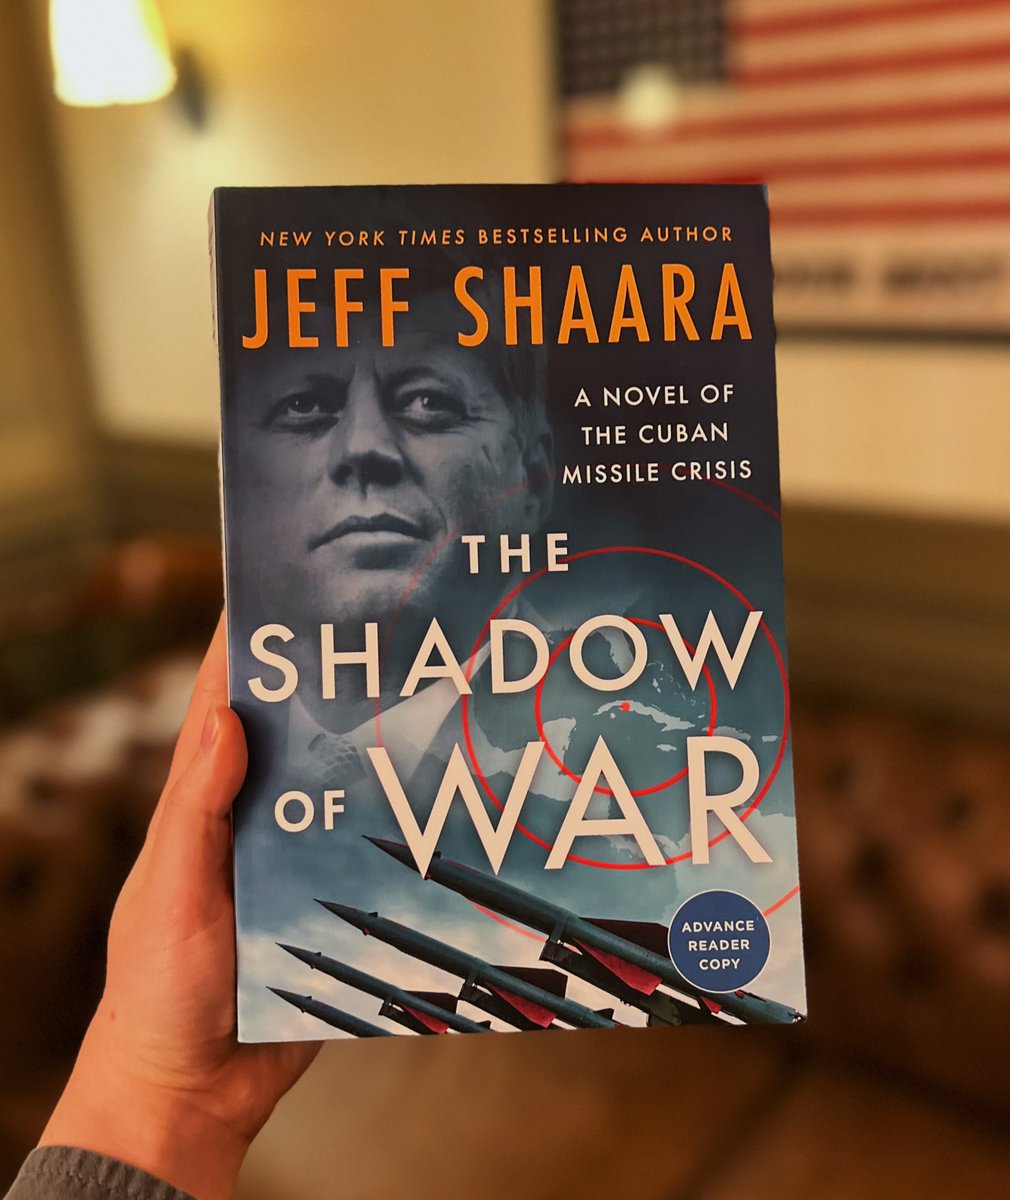 Calling all #historicalfiction fans: From bestselling author #JeffShaara comes the story of rising conflict between the super-powers that gripped the world, a global war that almost happened: The #CubanMissileCrisis. 🇺🇸🔥 THE SHADOW OF WAR is on sale May 14th. #ComingSoon #JFK